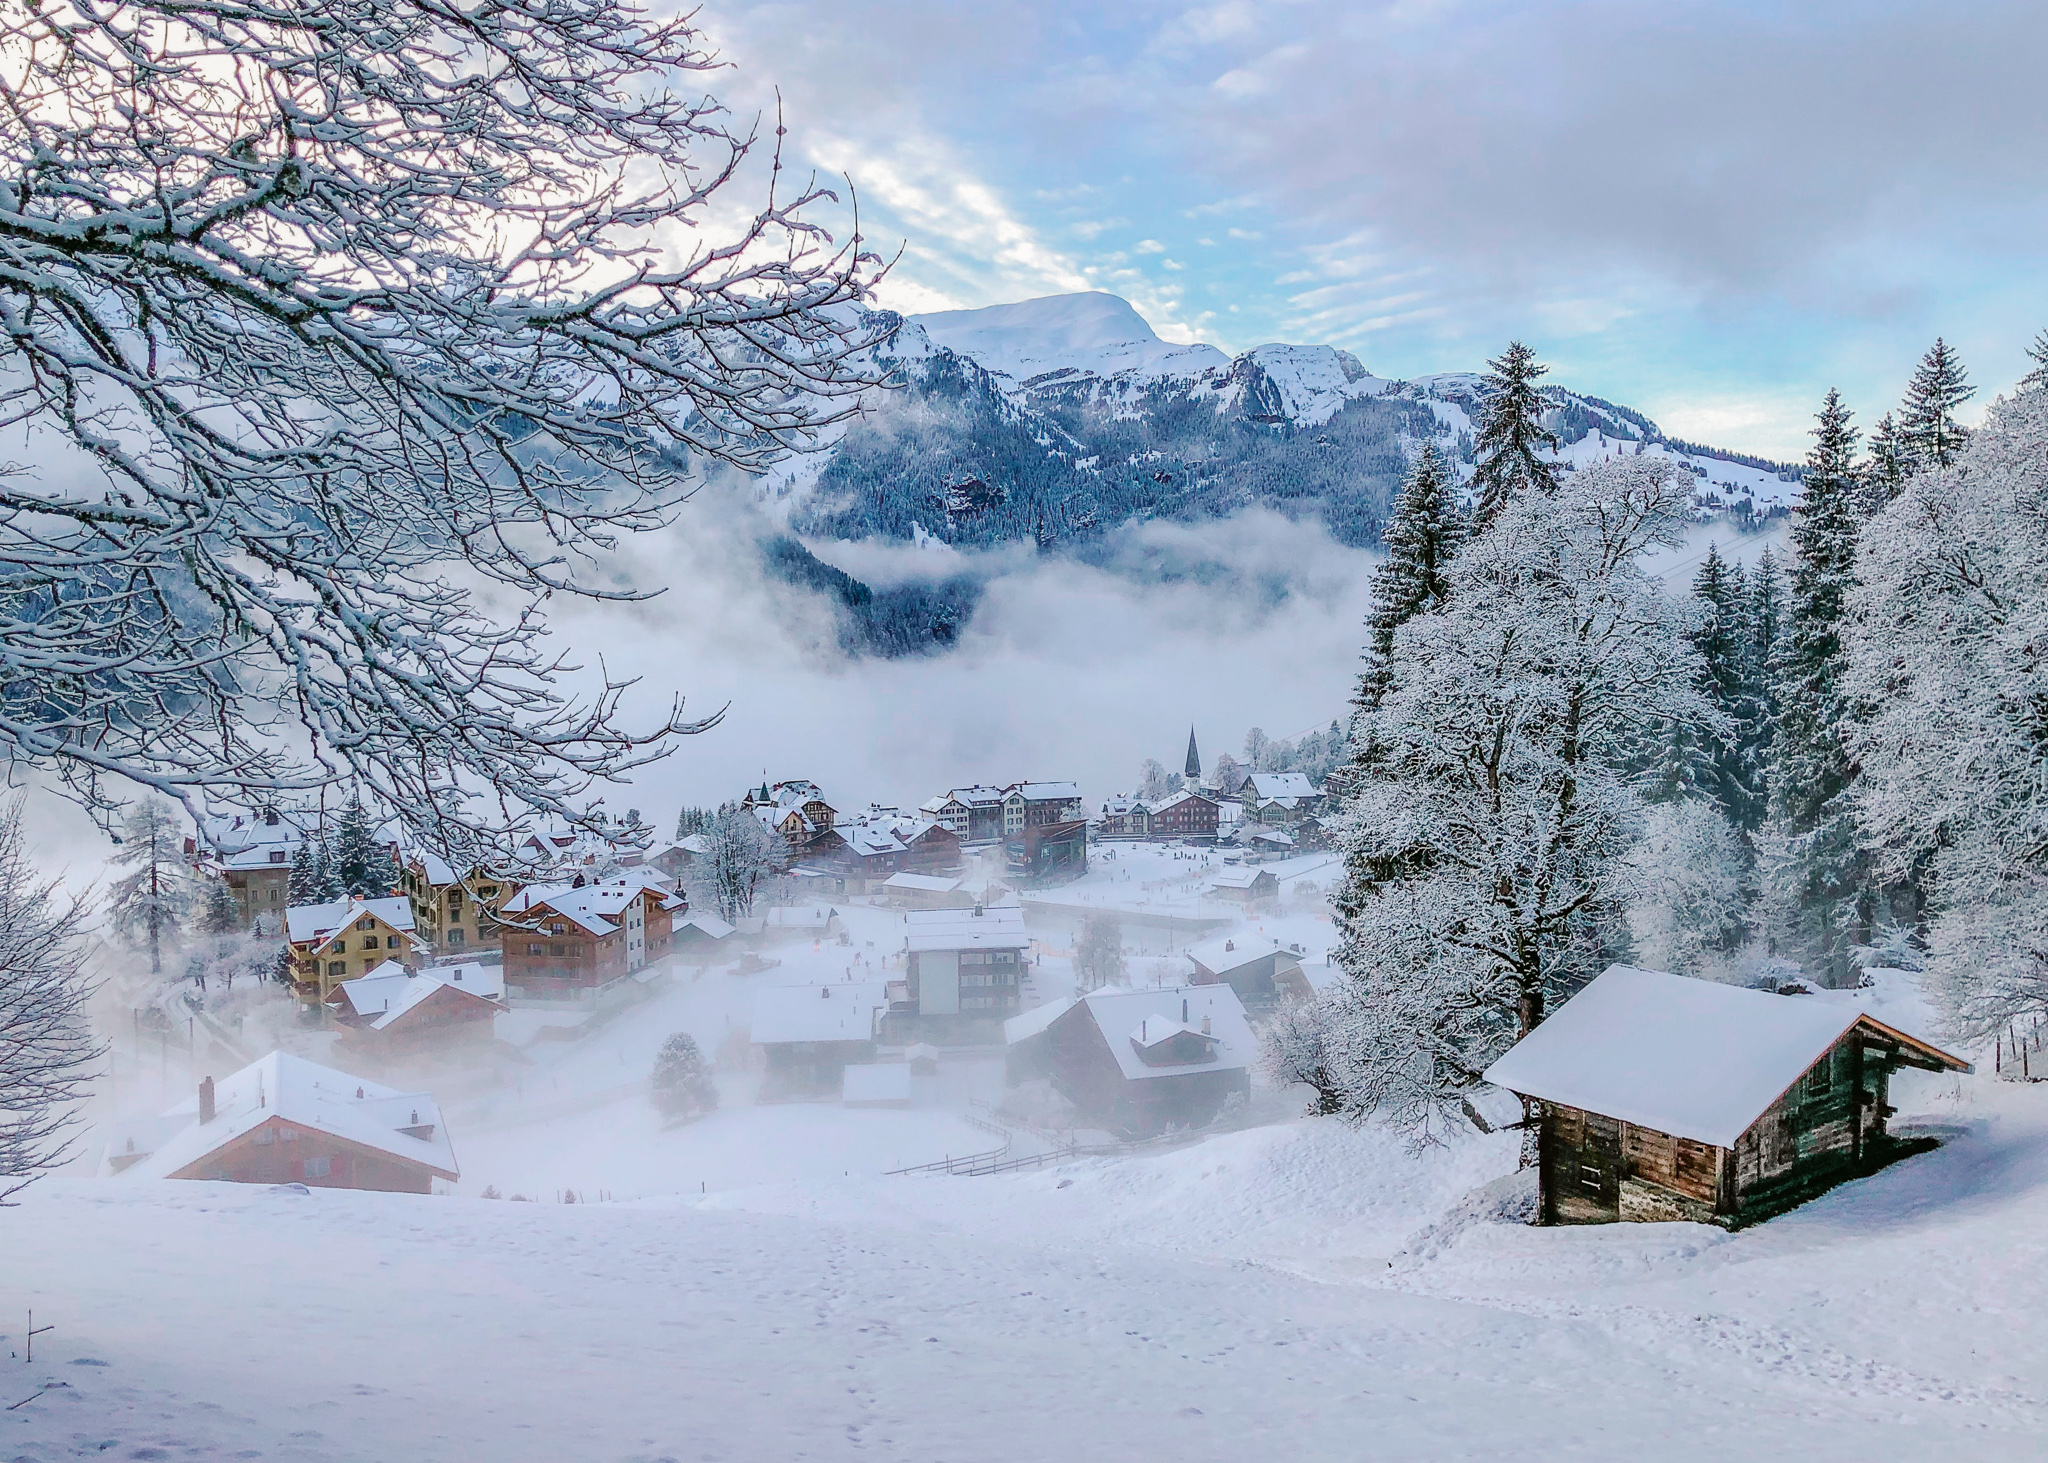 Wengen village in winter, a traditional Swiss alpine village of wooden chalet huts and the Swiss Alps in the background on a misty day.